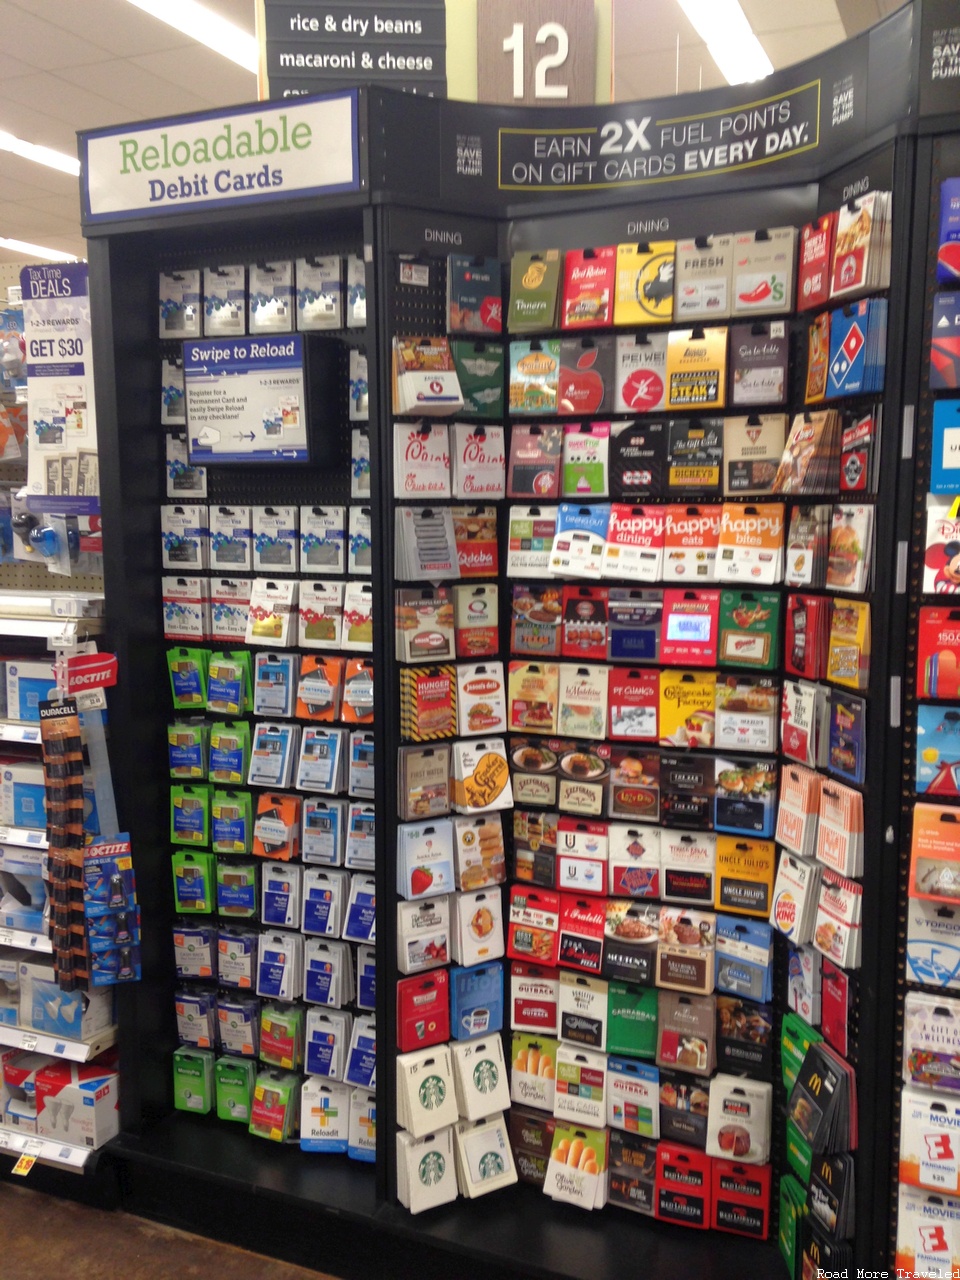 Kroger restaurant gift cards and prepaid cards